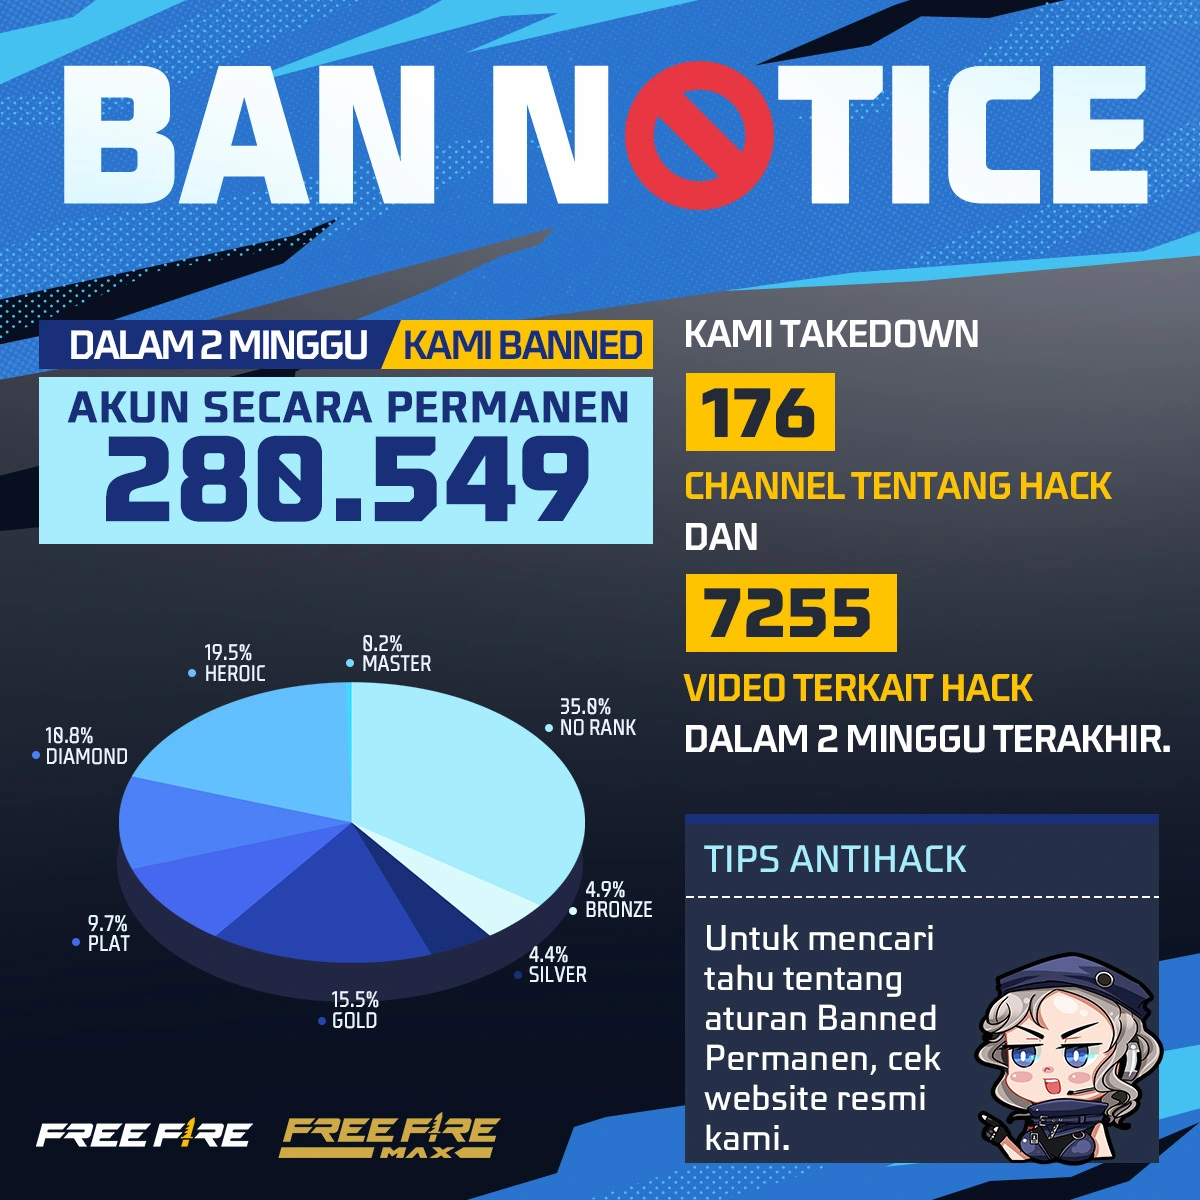 Free Fire Hack: Garena bans over 30 million accounts for hacking